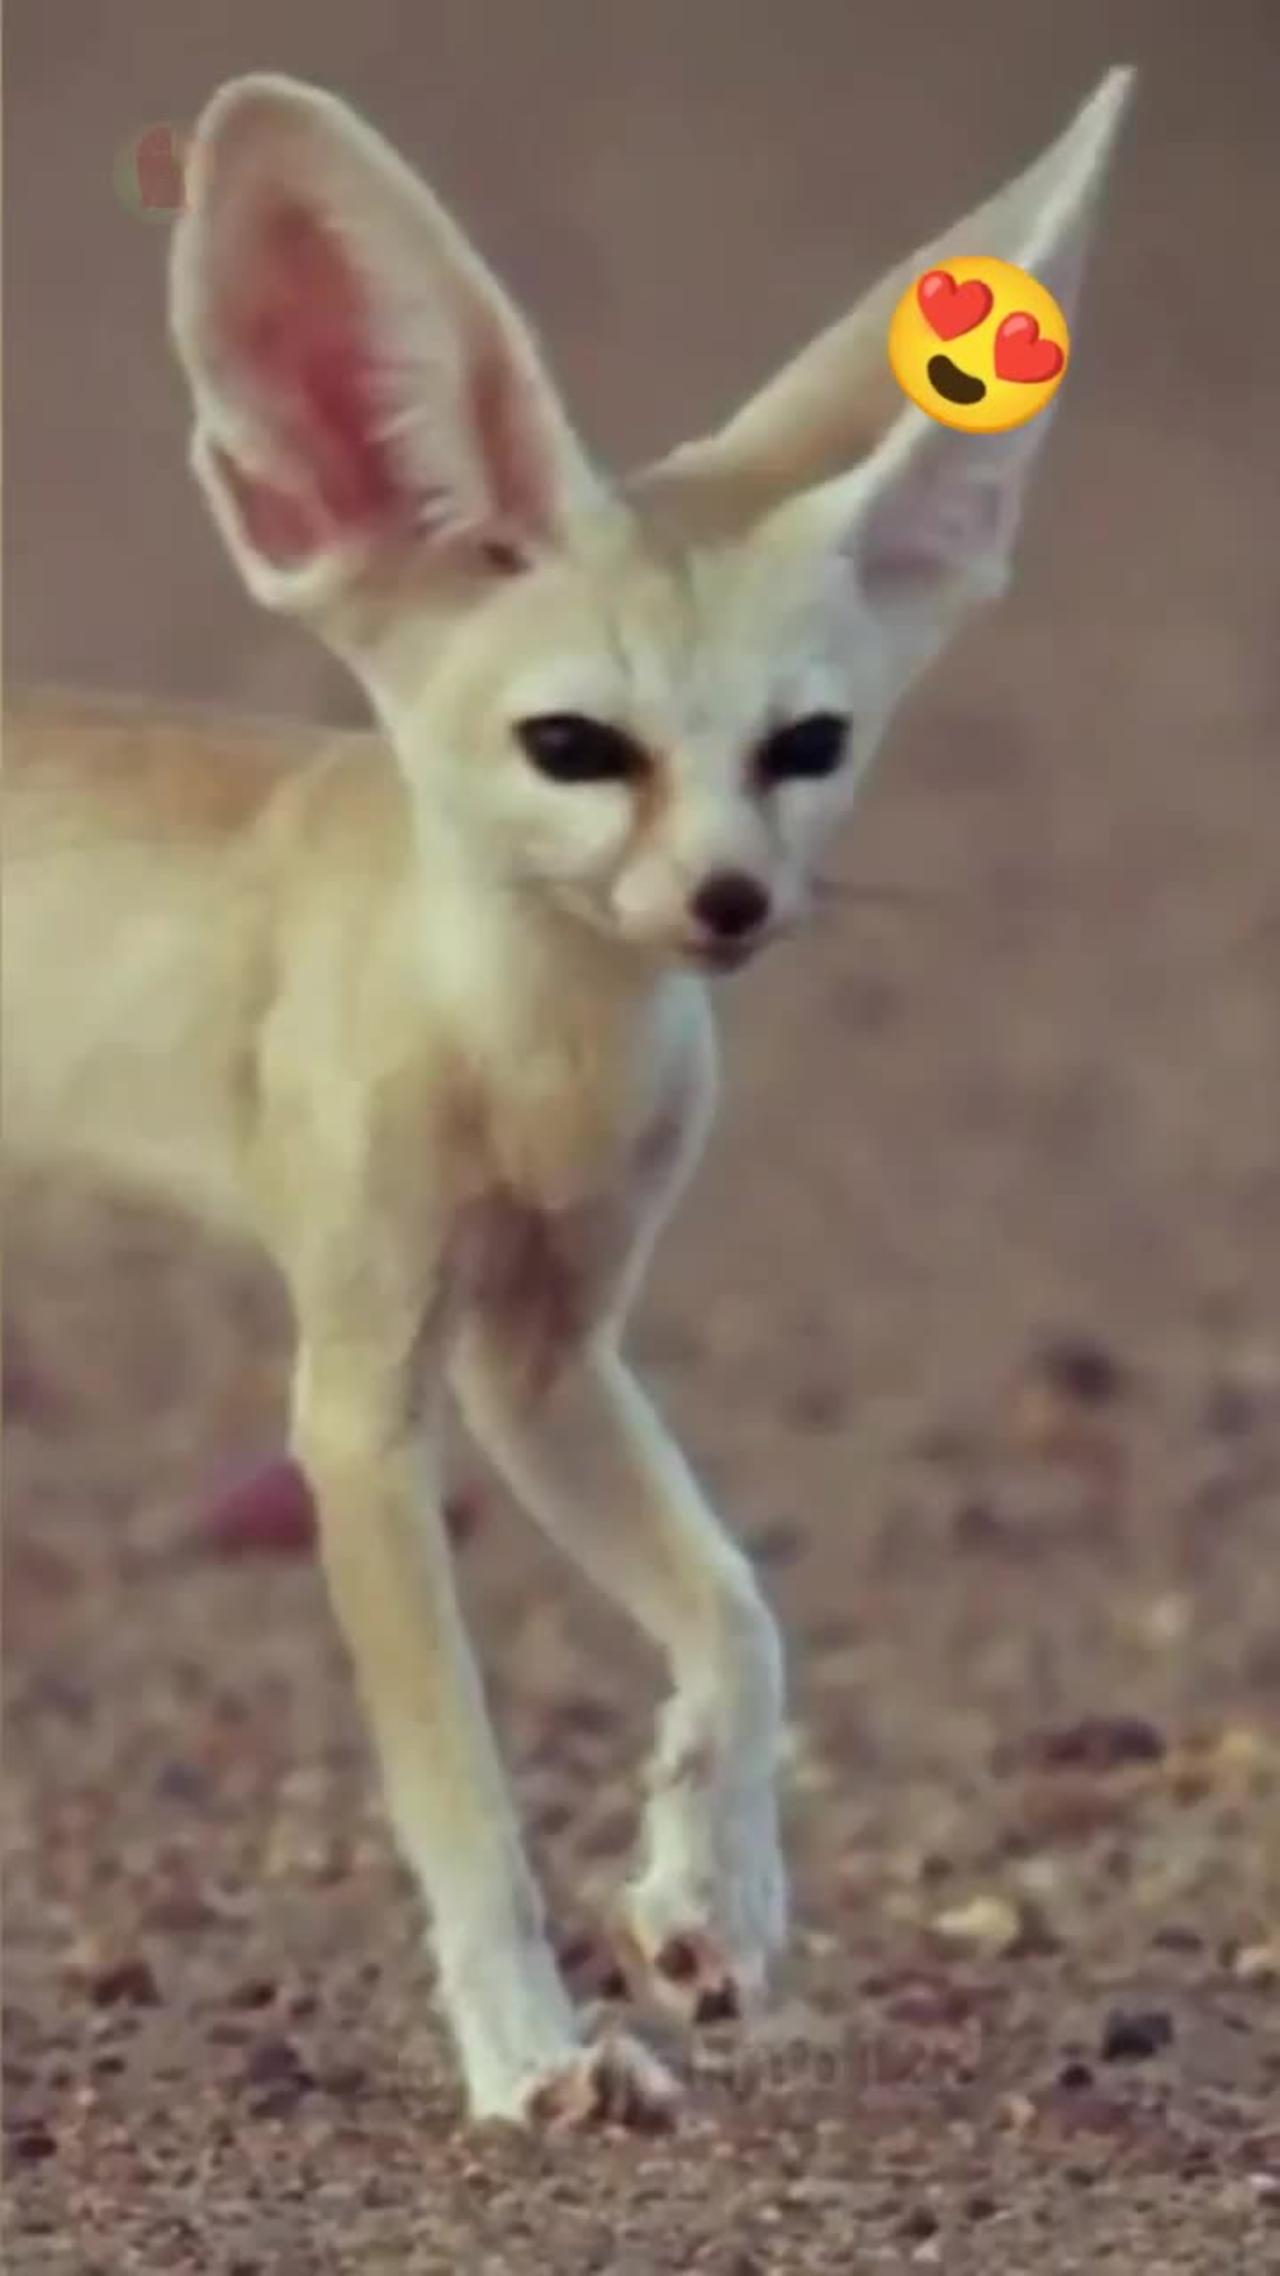 Fennec Fox😻 the smallest in size, so cute😍